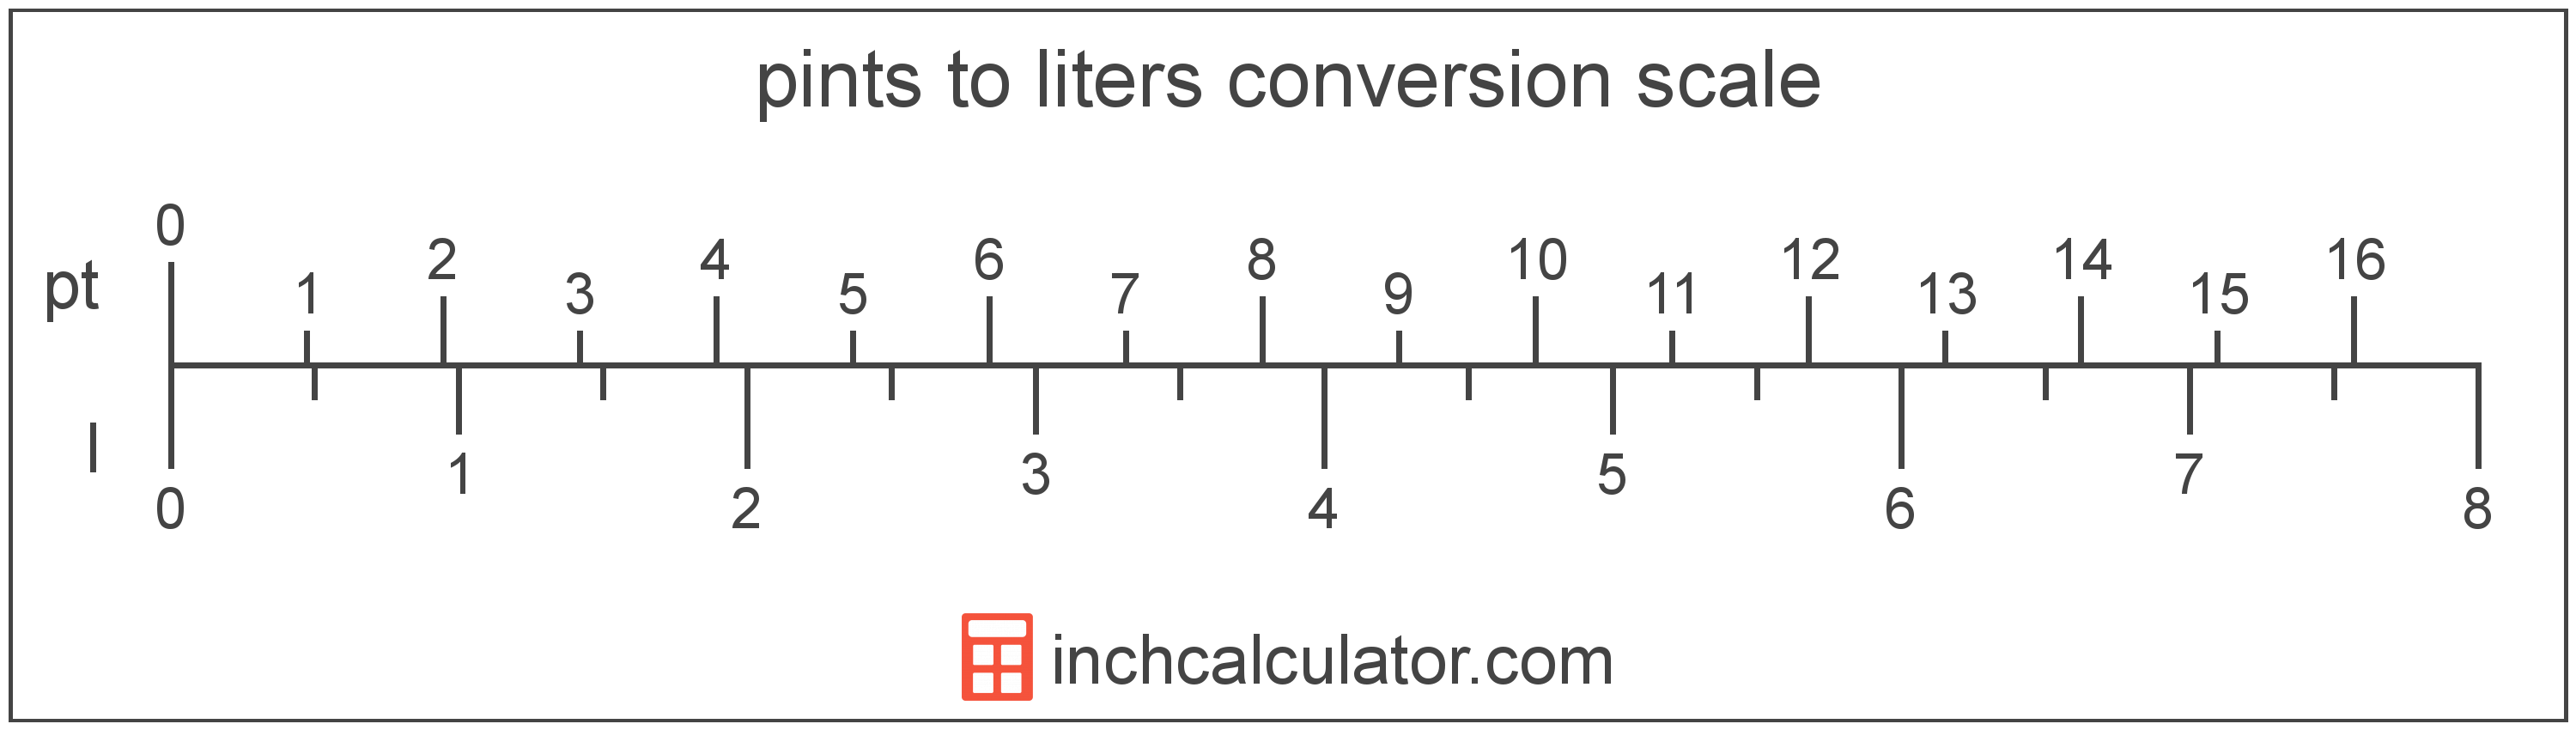 conversion scale showing pints and equivalent liters volume values